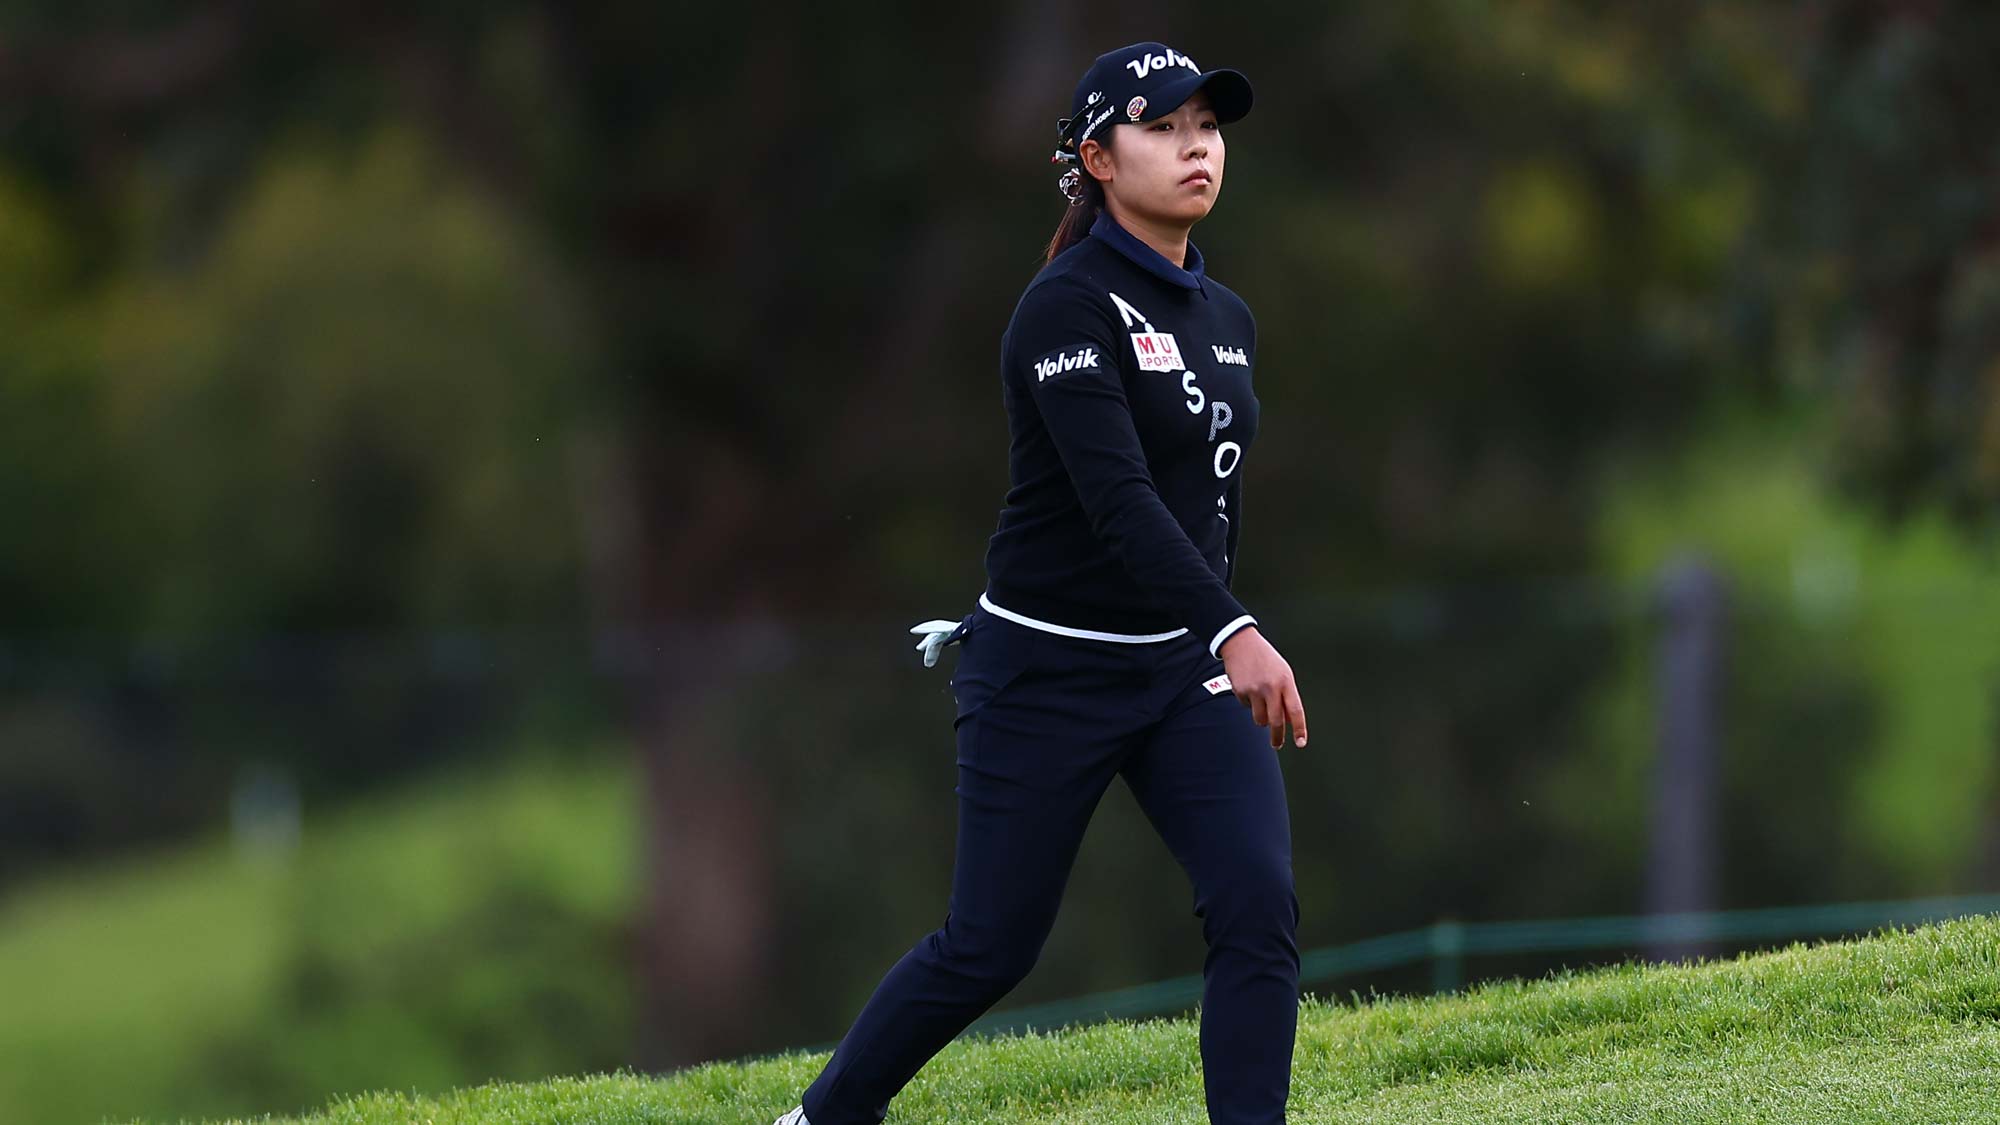 Mi Hyang Lee of South Korea walks up the 15th fairway during the first round of the DIO Implant LA Open